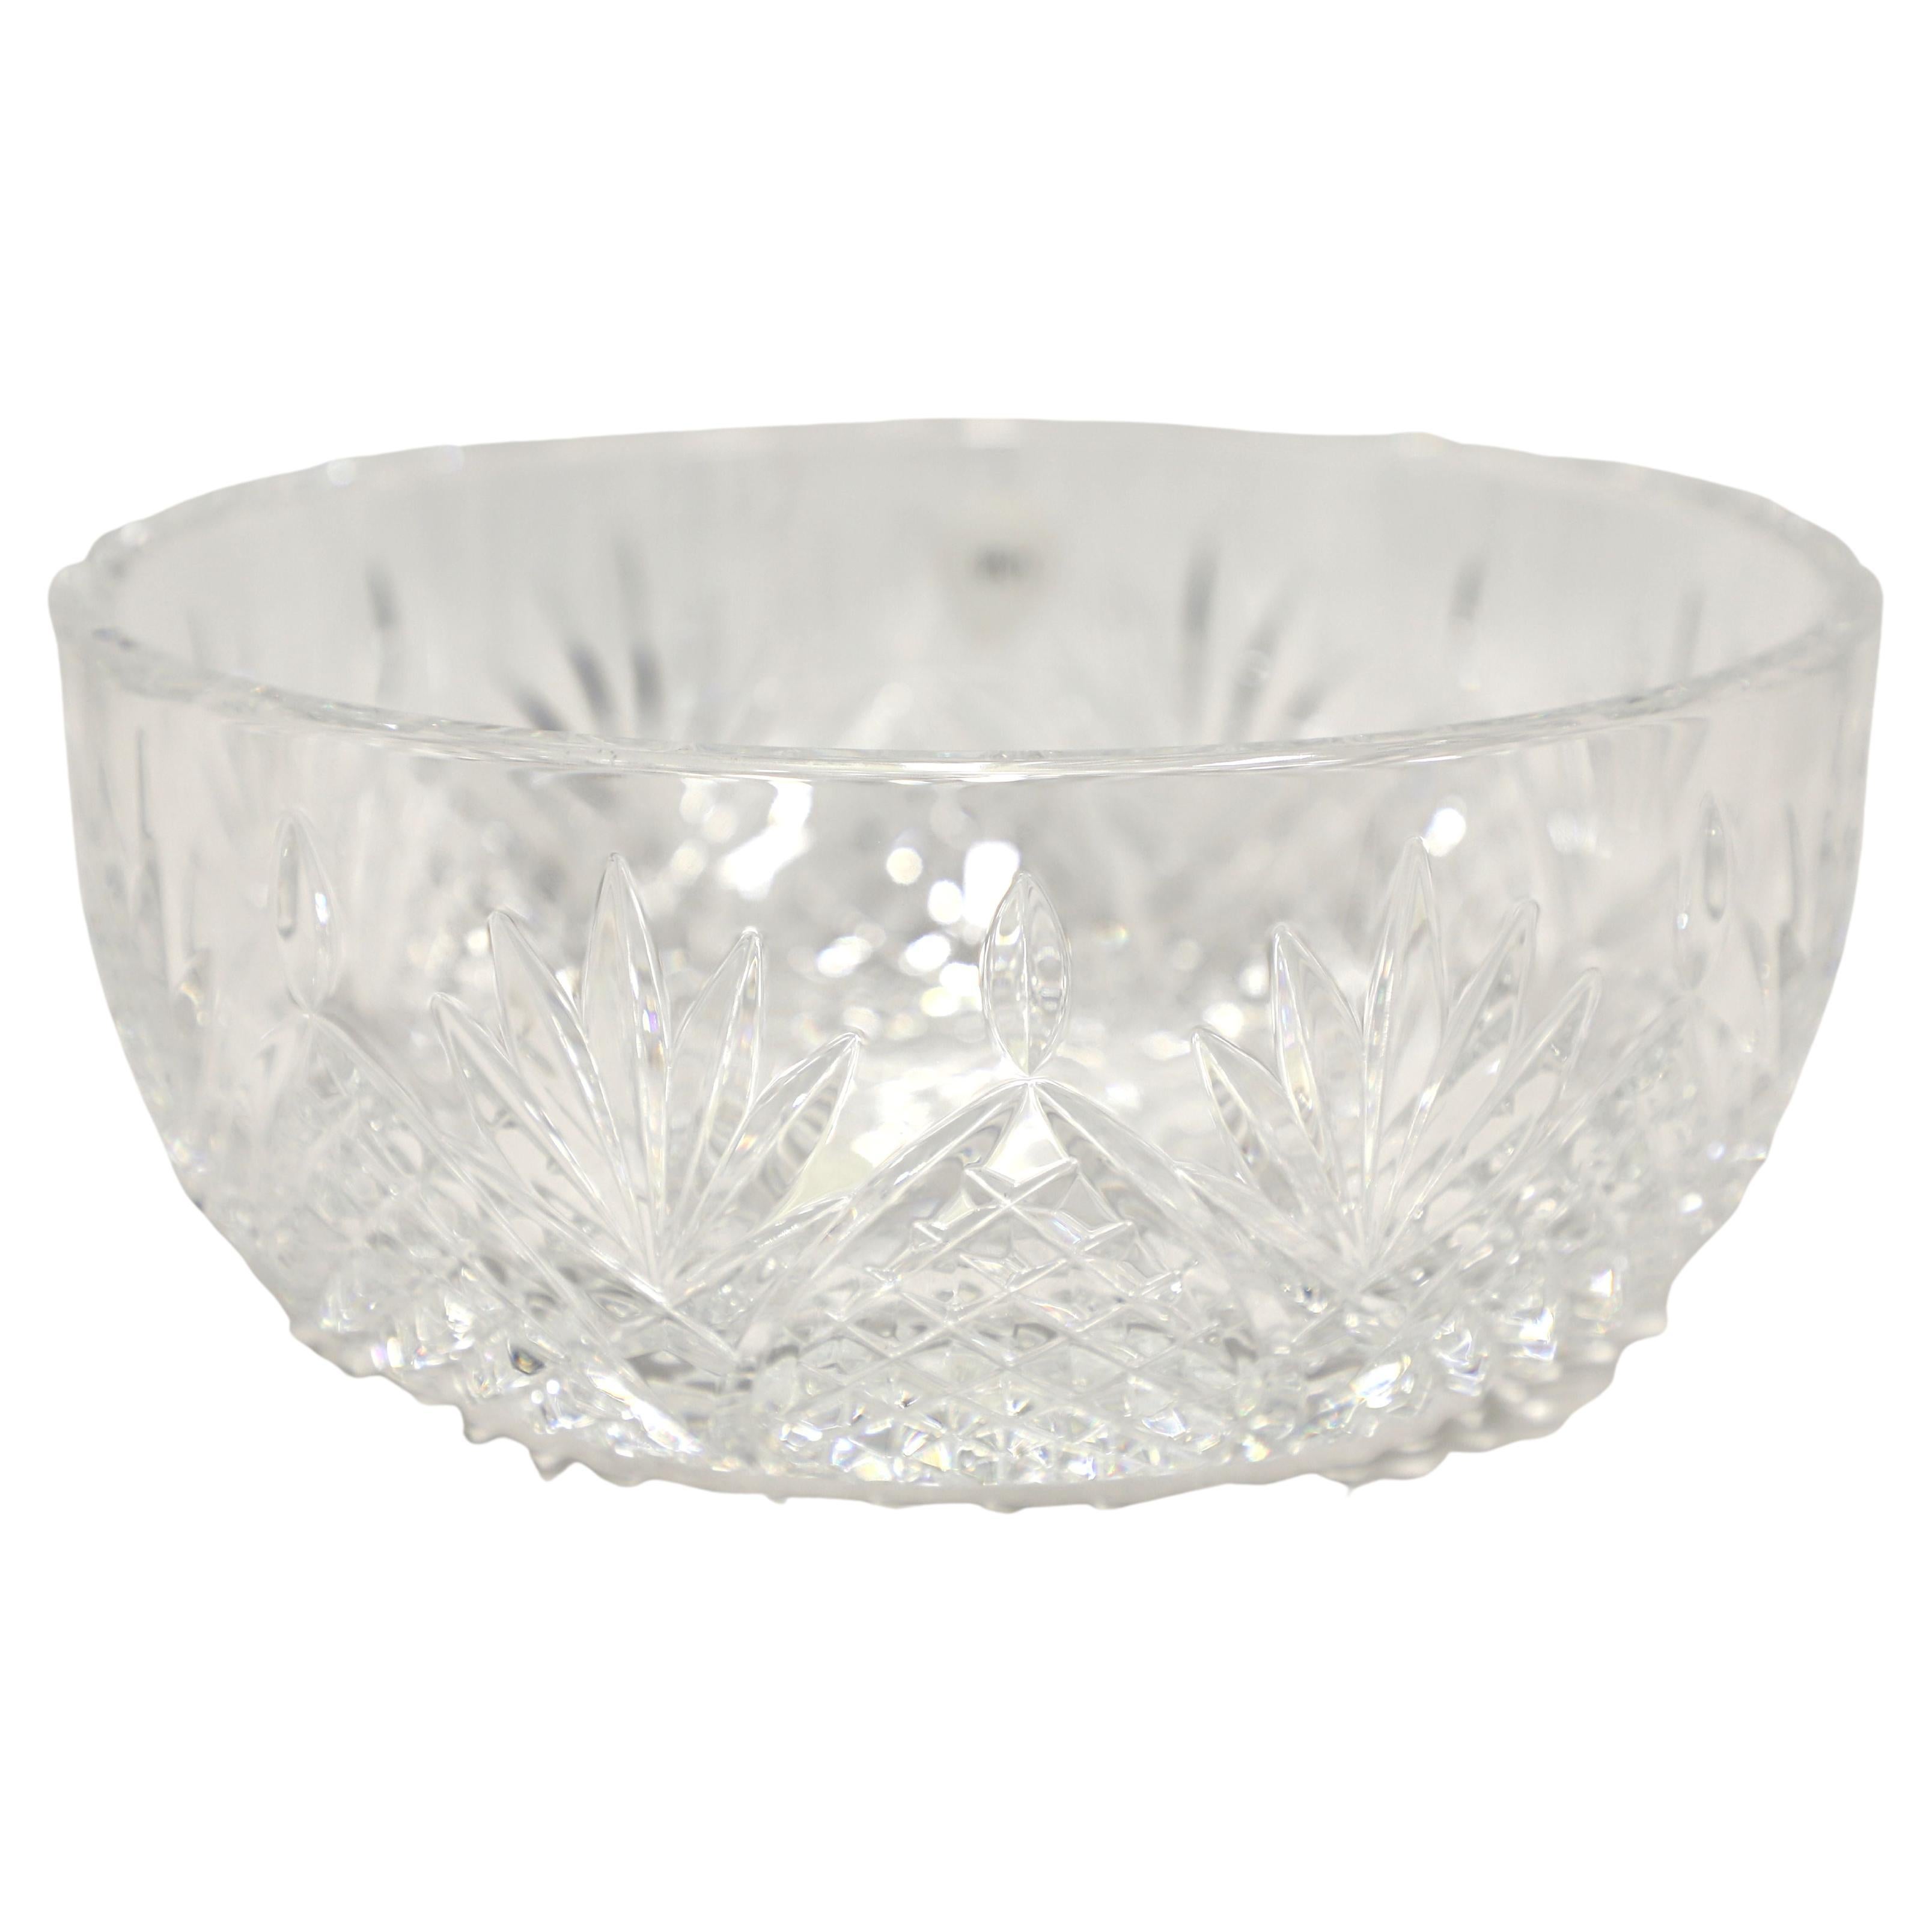 Waterford Crystal Ireland 8" Viking Triangle Bowl *New in Open Box* (Nouveau dans une boîte ouverte)